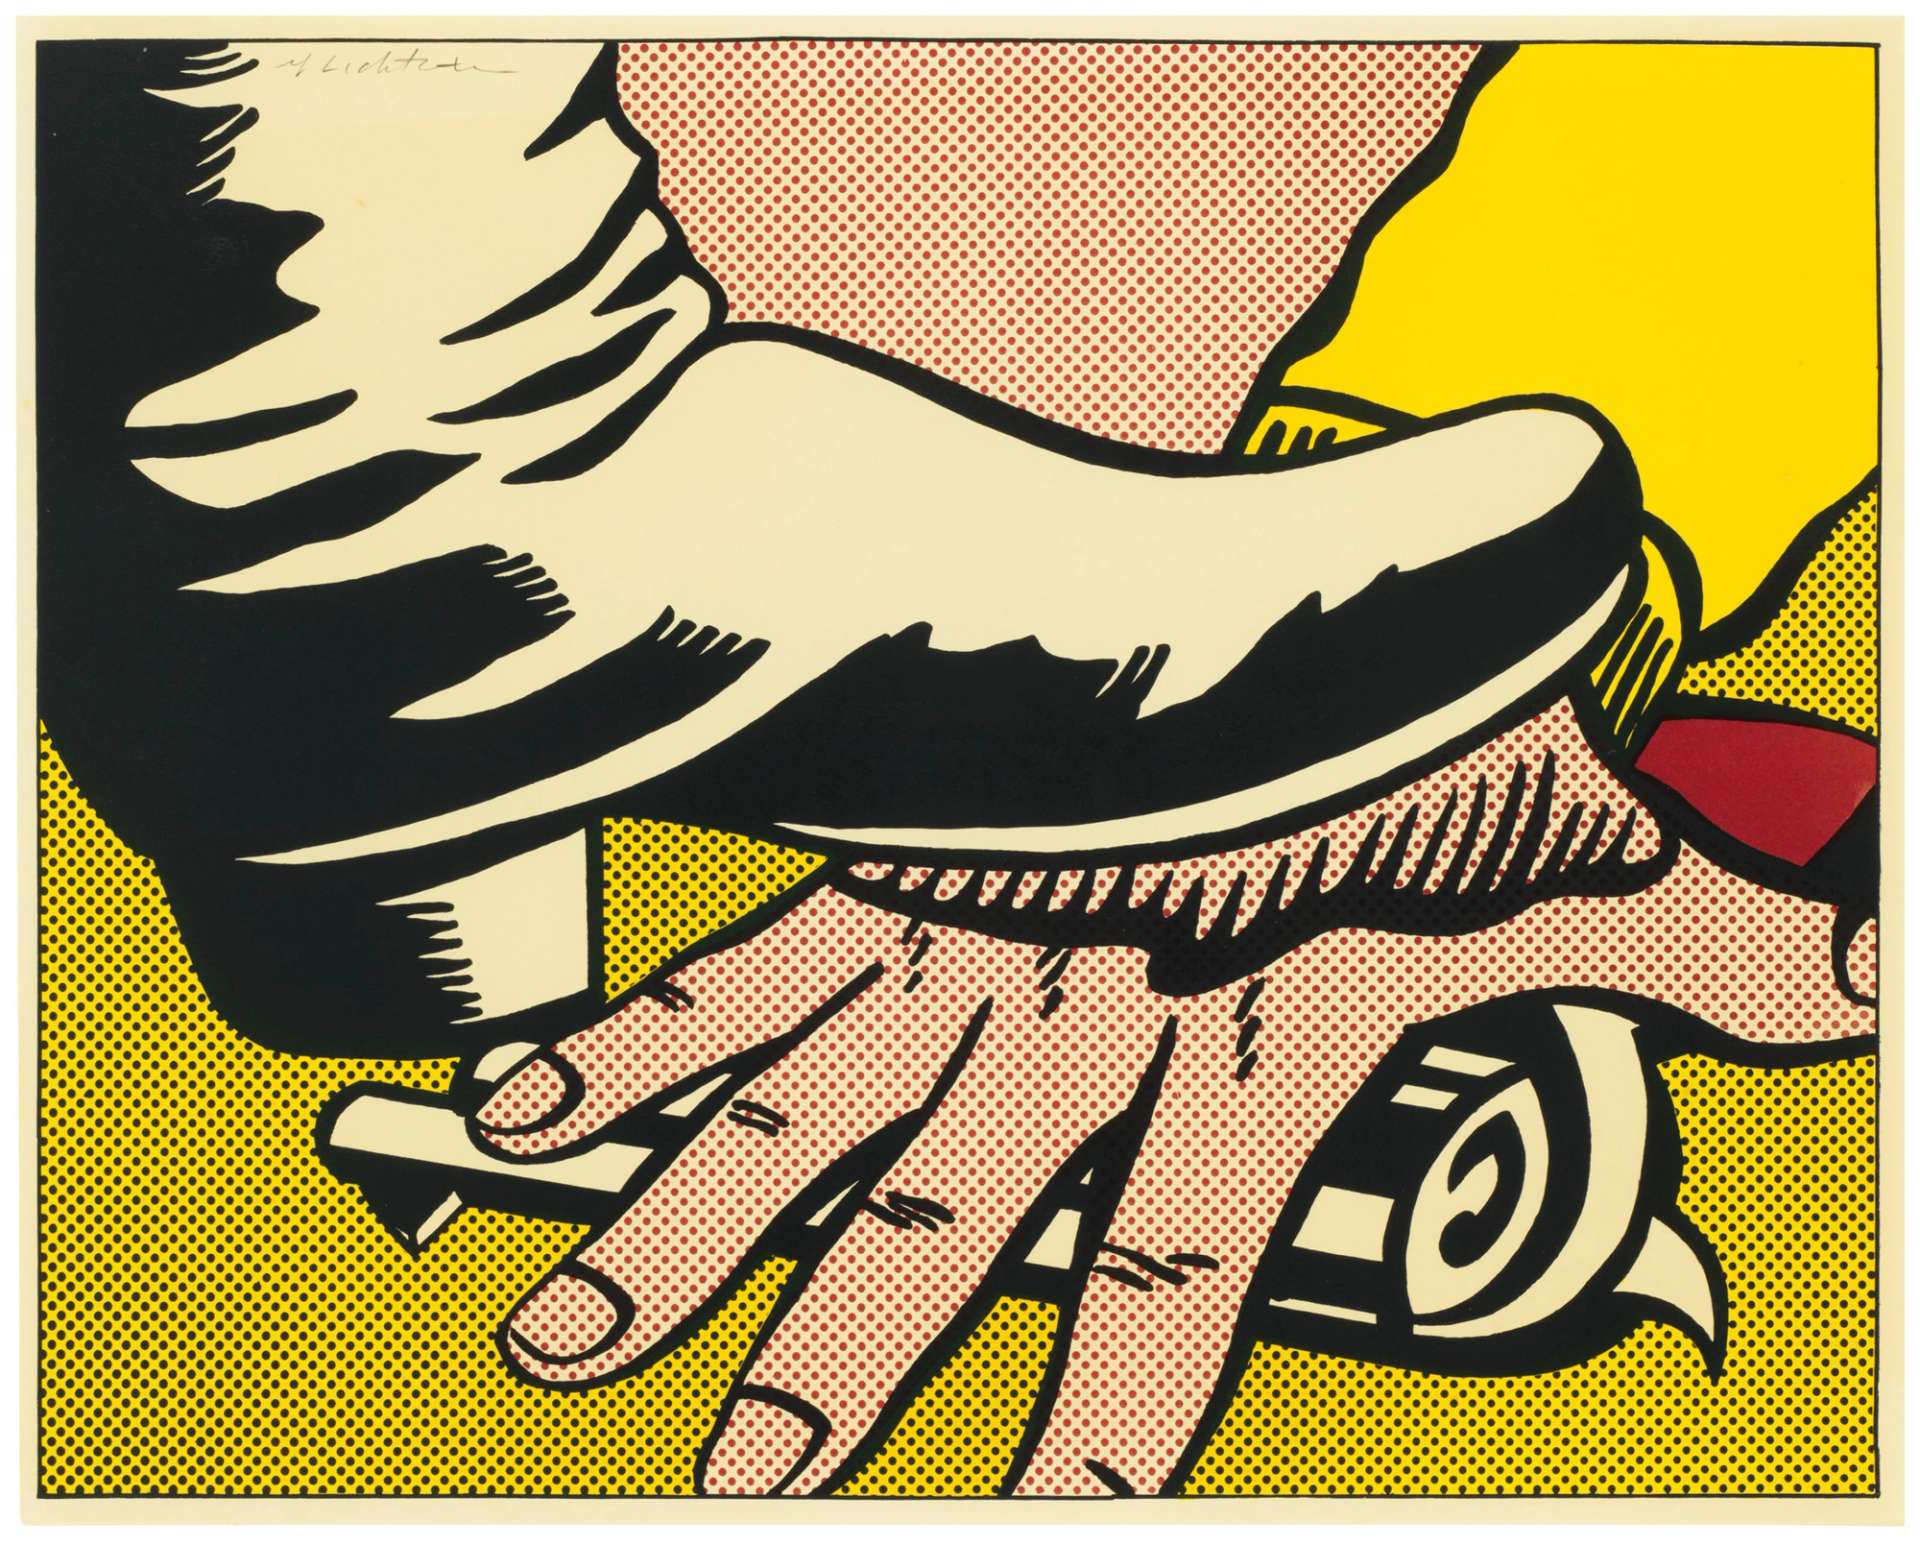 A screenprint by Roy Lichtenstein depicting a hand to the right of the composition being trampled by a black boot to the left, set against a yellow and red dot background.